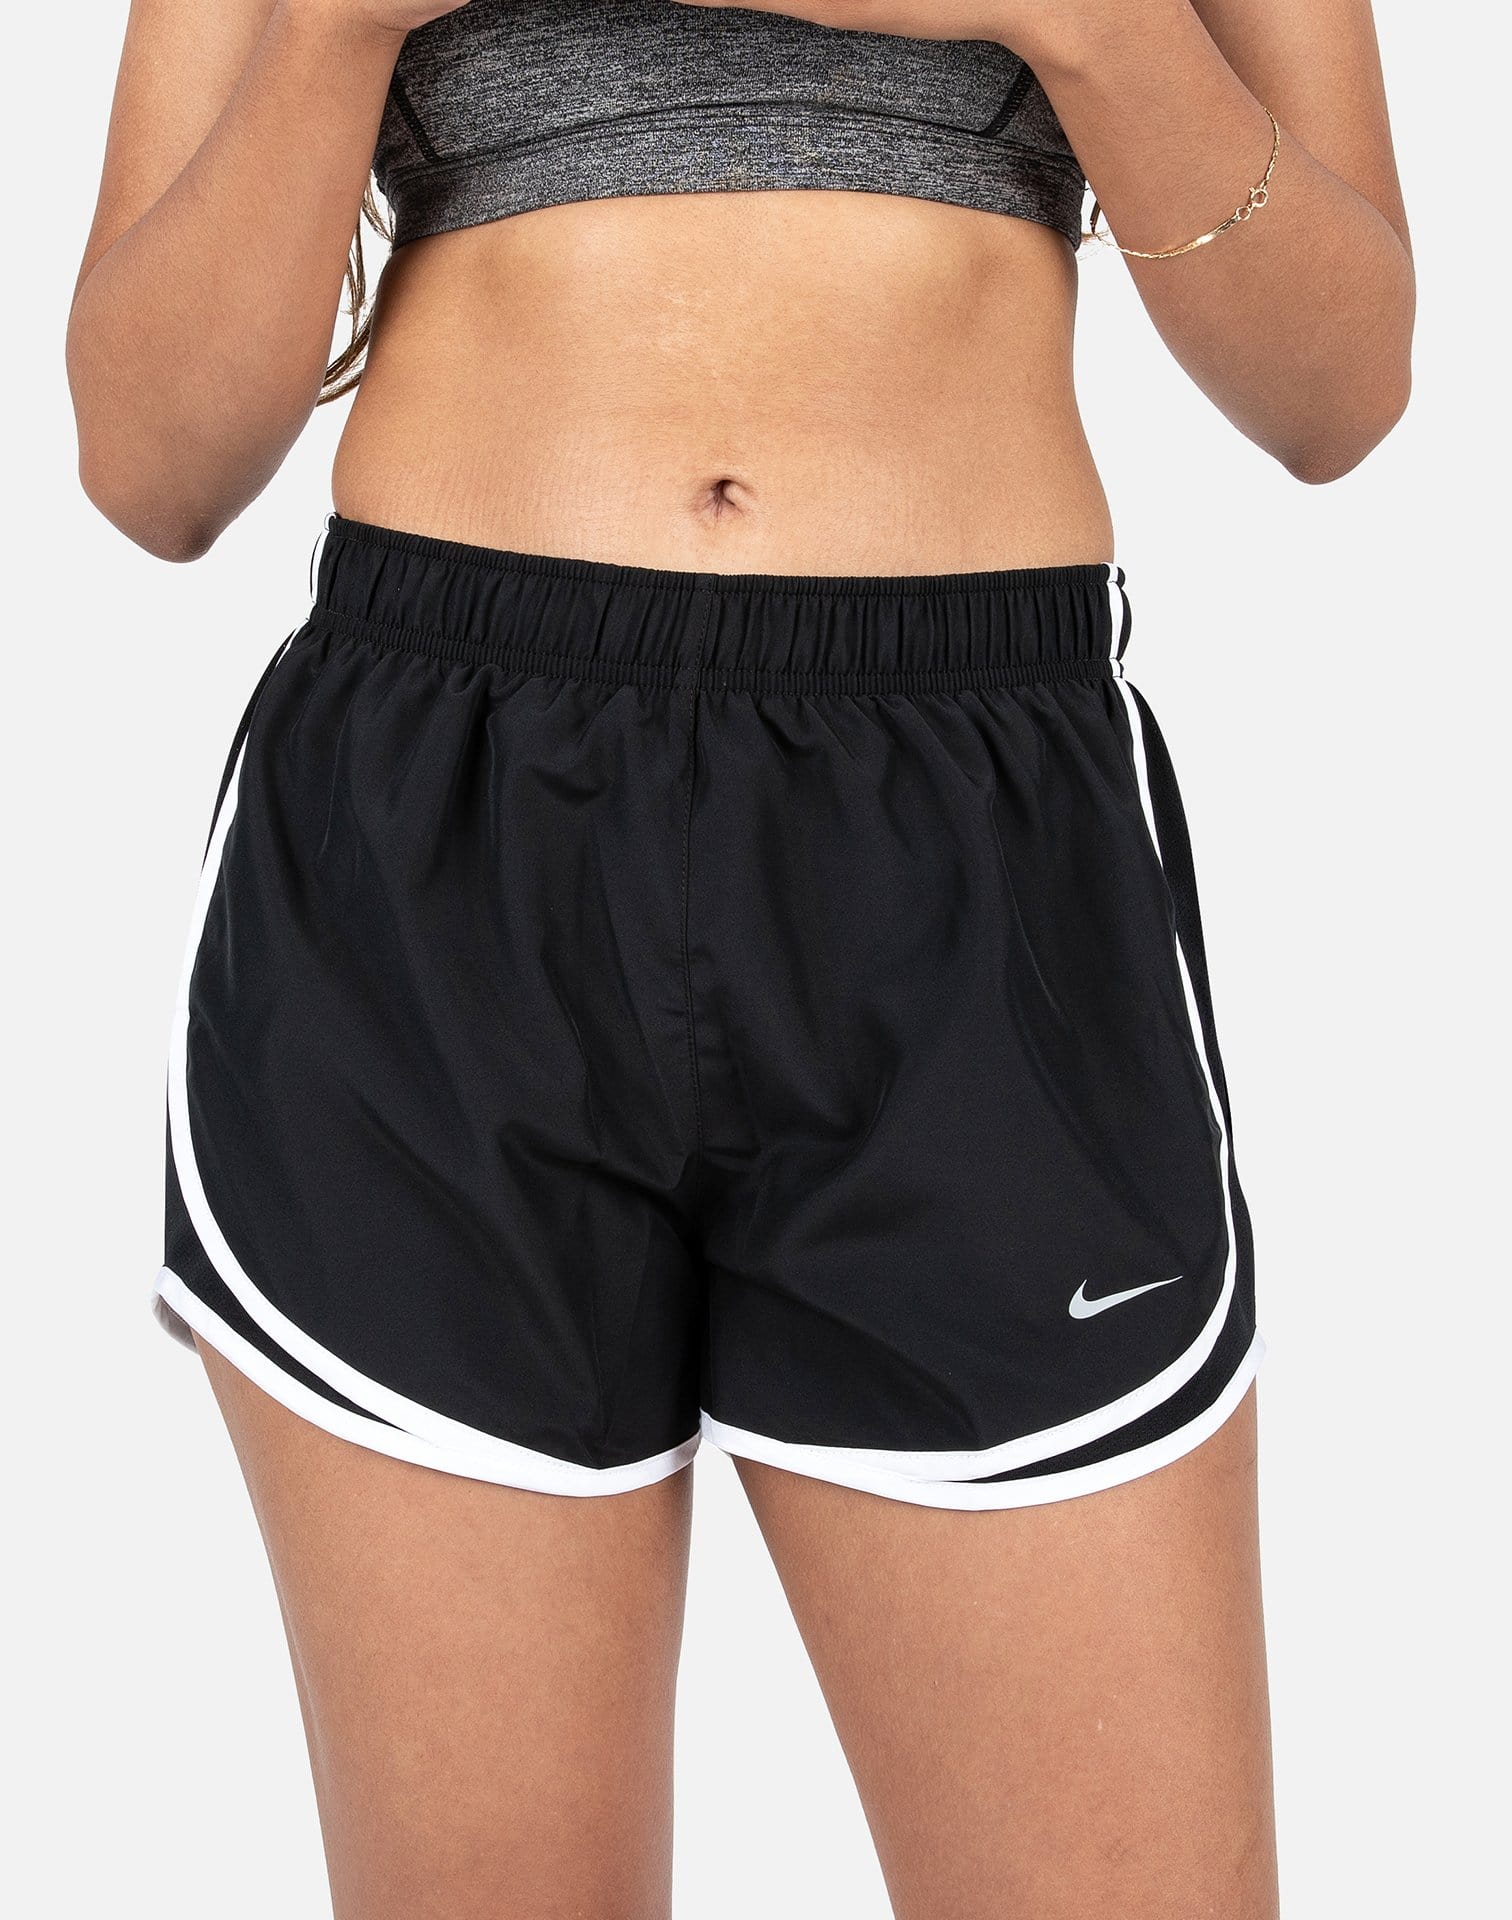 Nike NSW TEMPO RUNNING SHORTS  - Black - Size: Extra Small